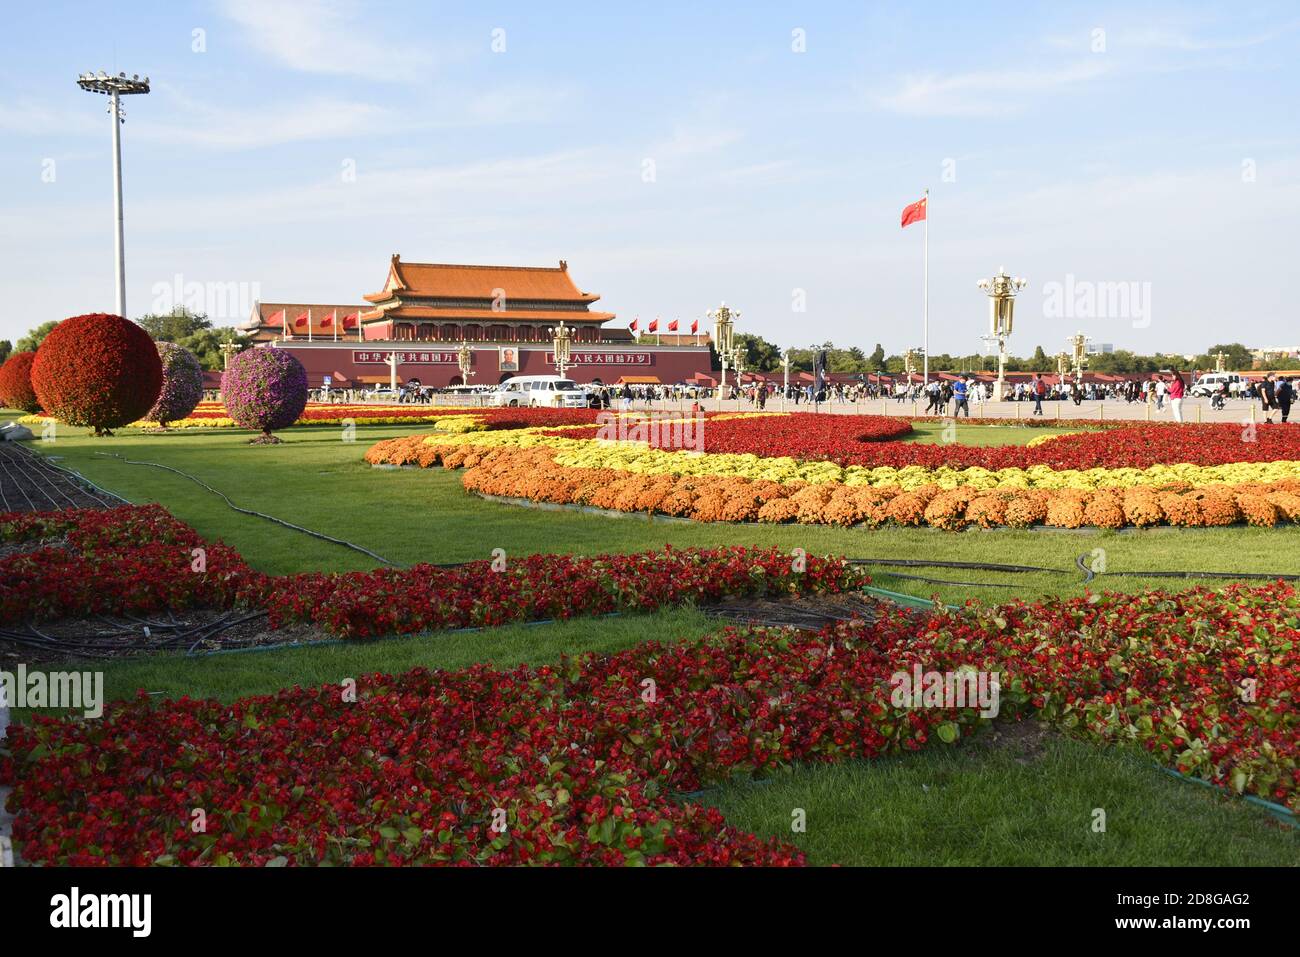 Decoration flowers bloom in the Tian'anmen Square, well-prepared for the National Day of China, Beijing, China, 20 September 2020. Stock Photo